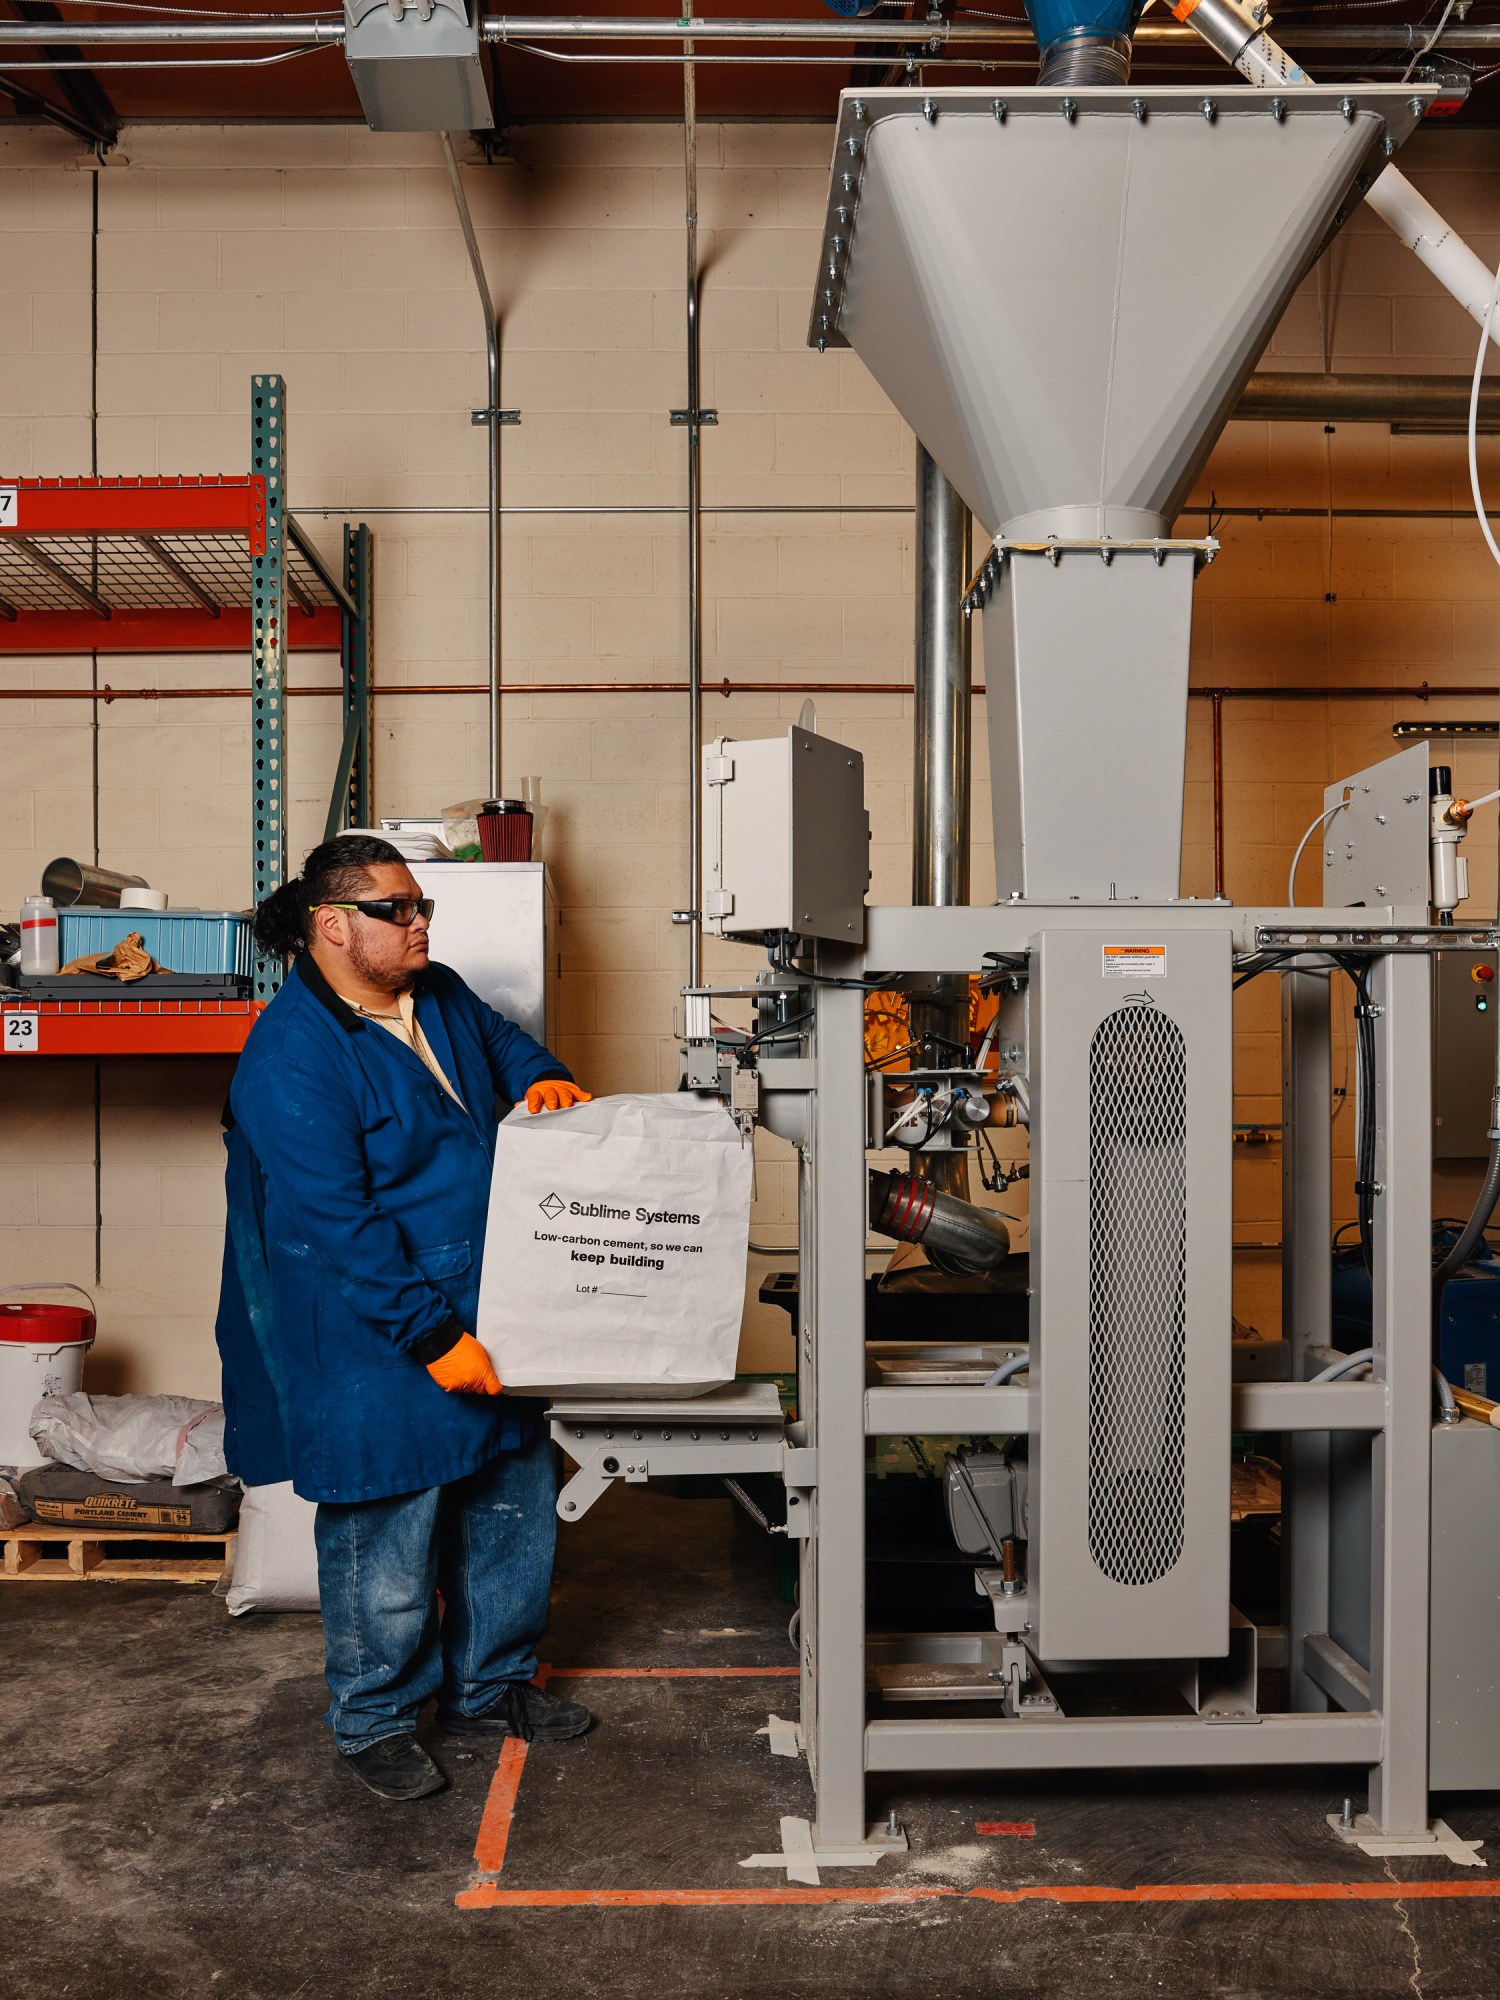 A worker loading a bag that reads " Sublime Systems; Low-carbon cement, so we can keep building" into a large machine